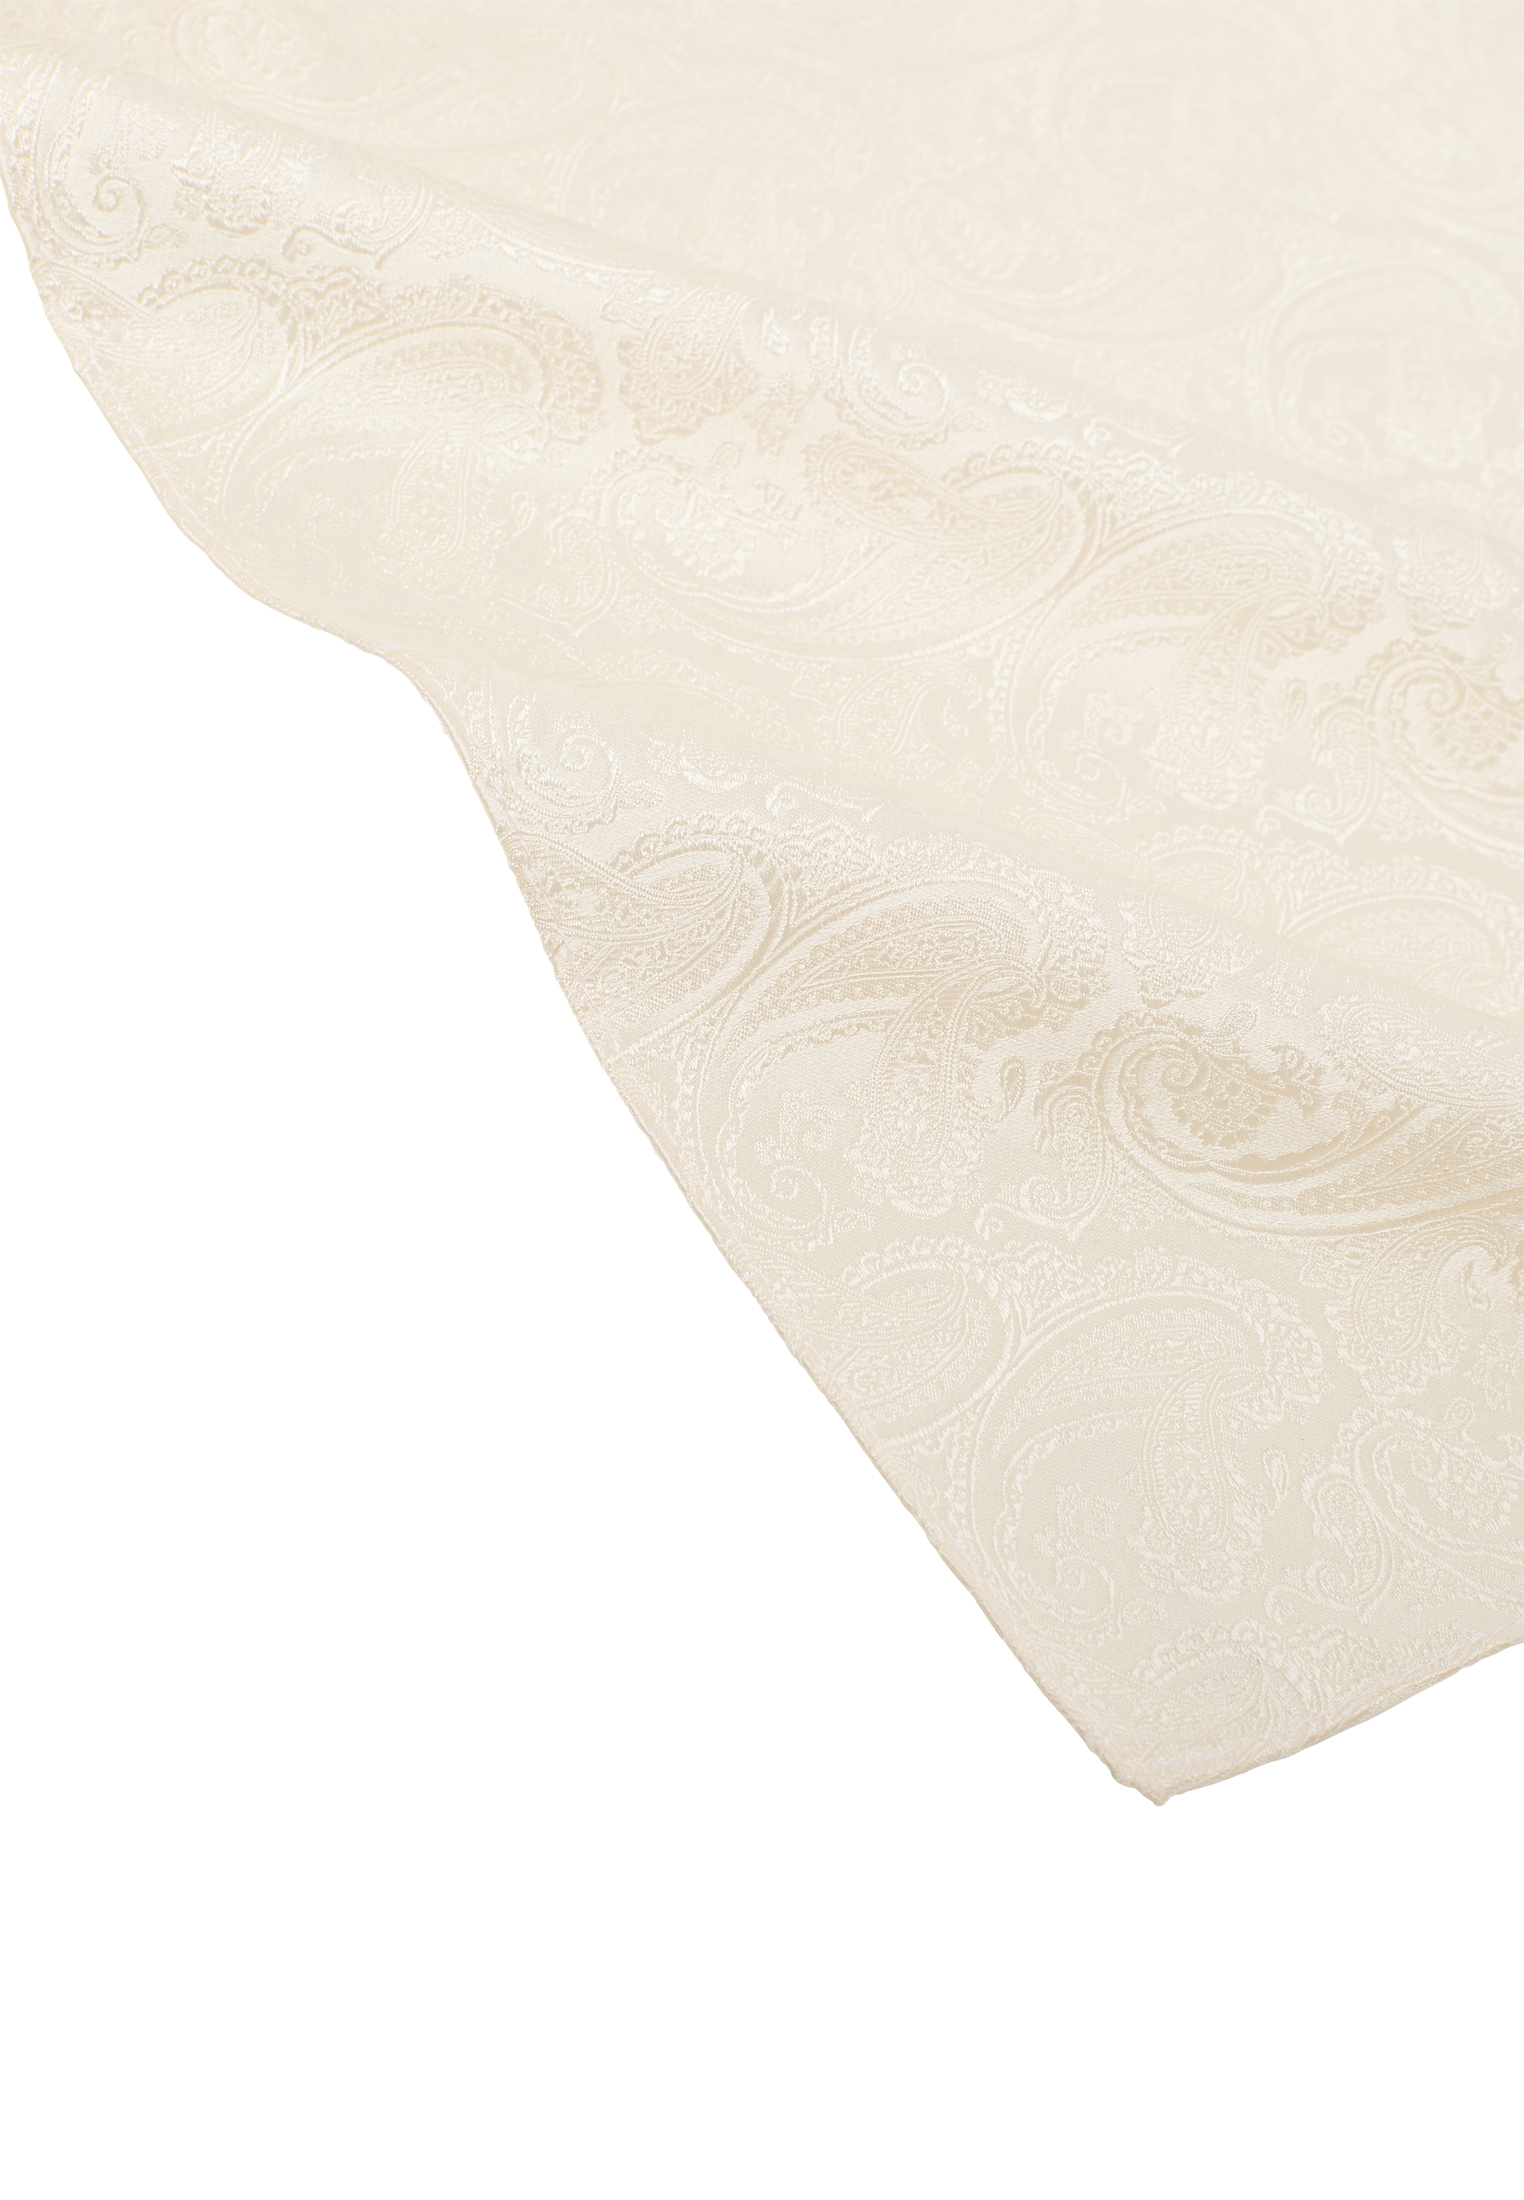 Pocket square in cream patterned